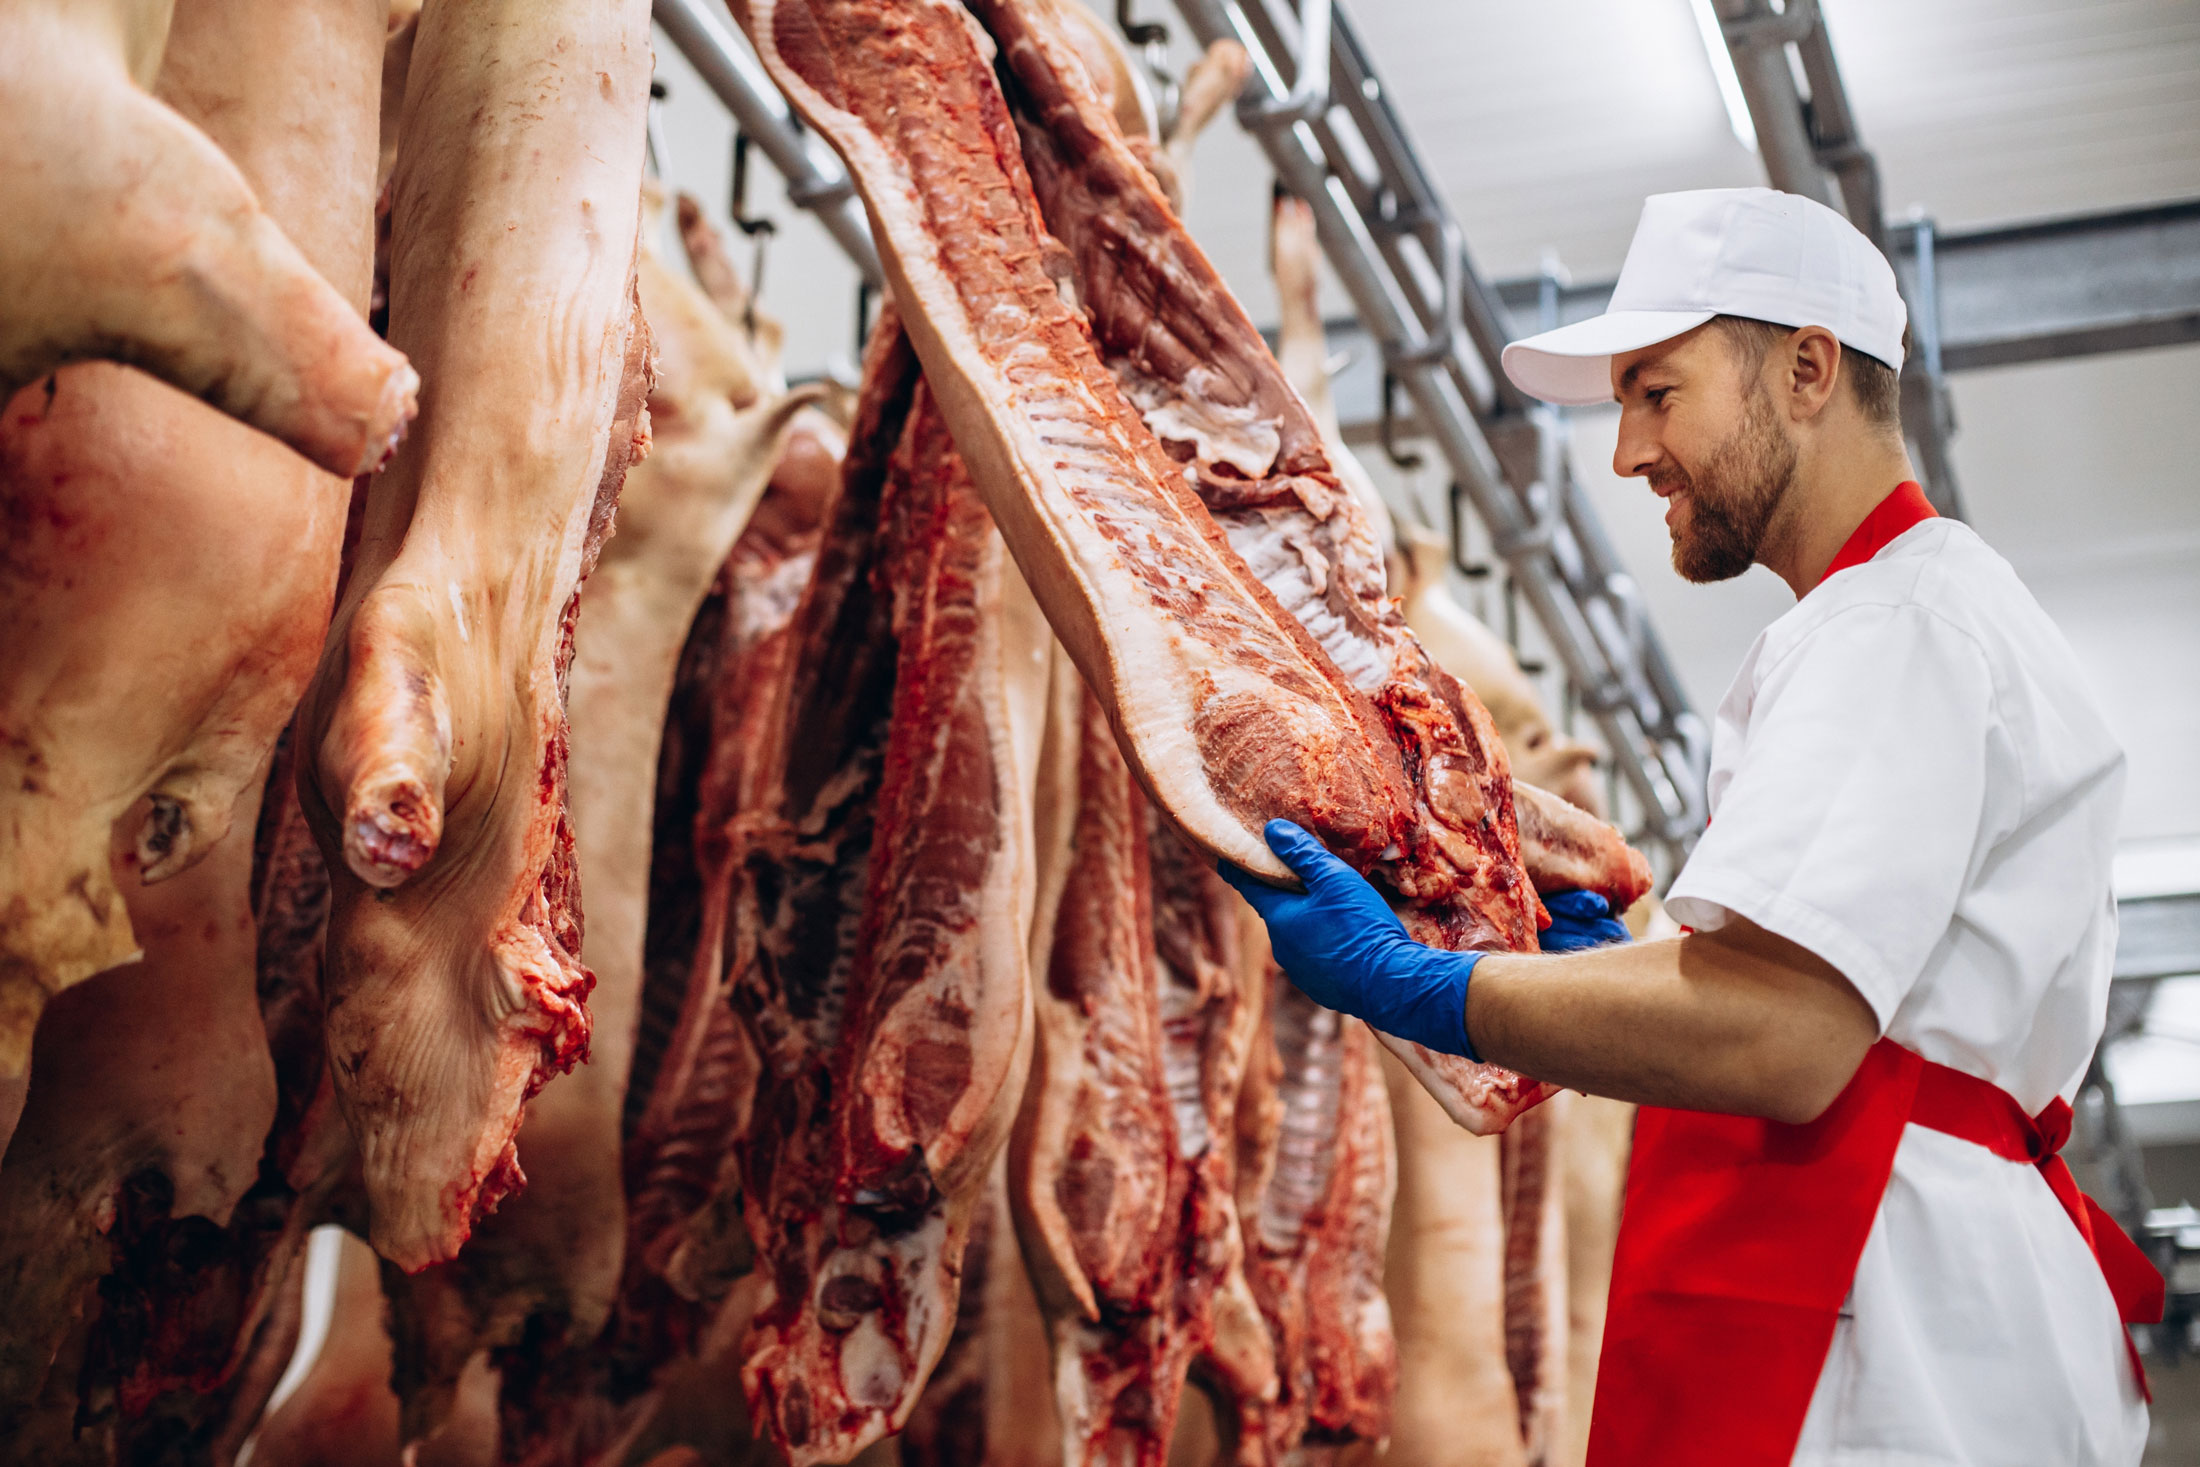 a man inspects butchered meat